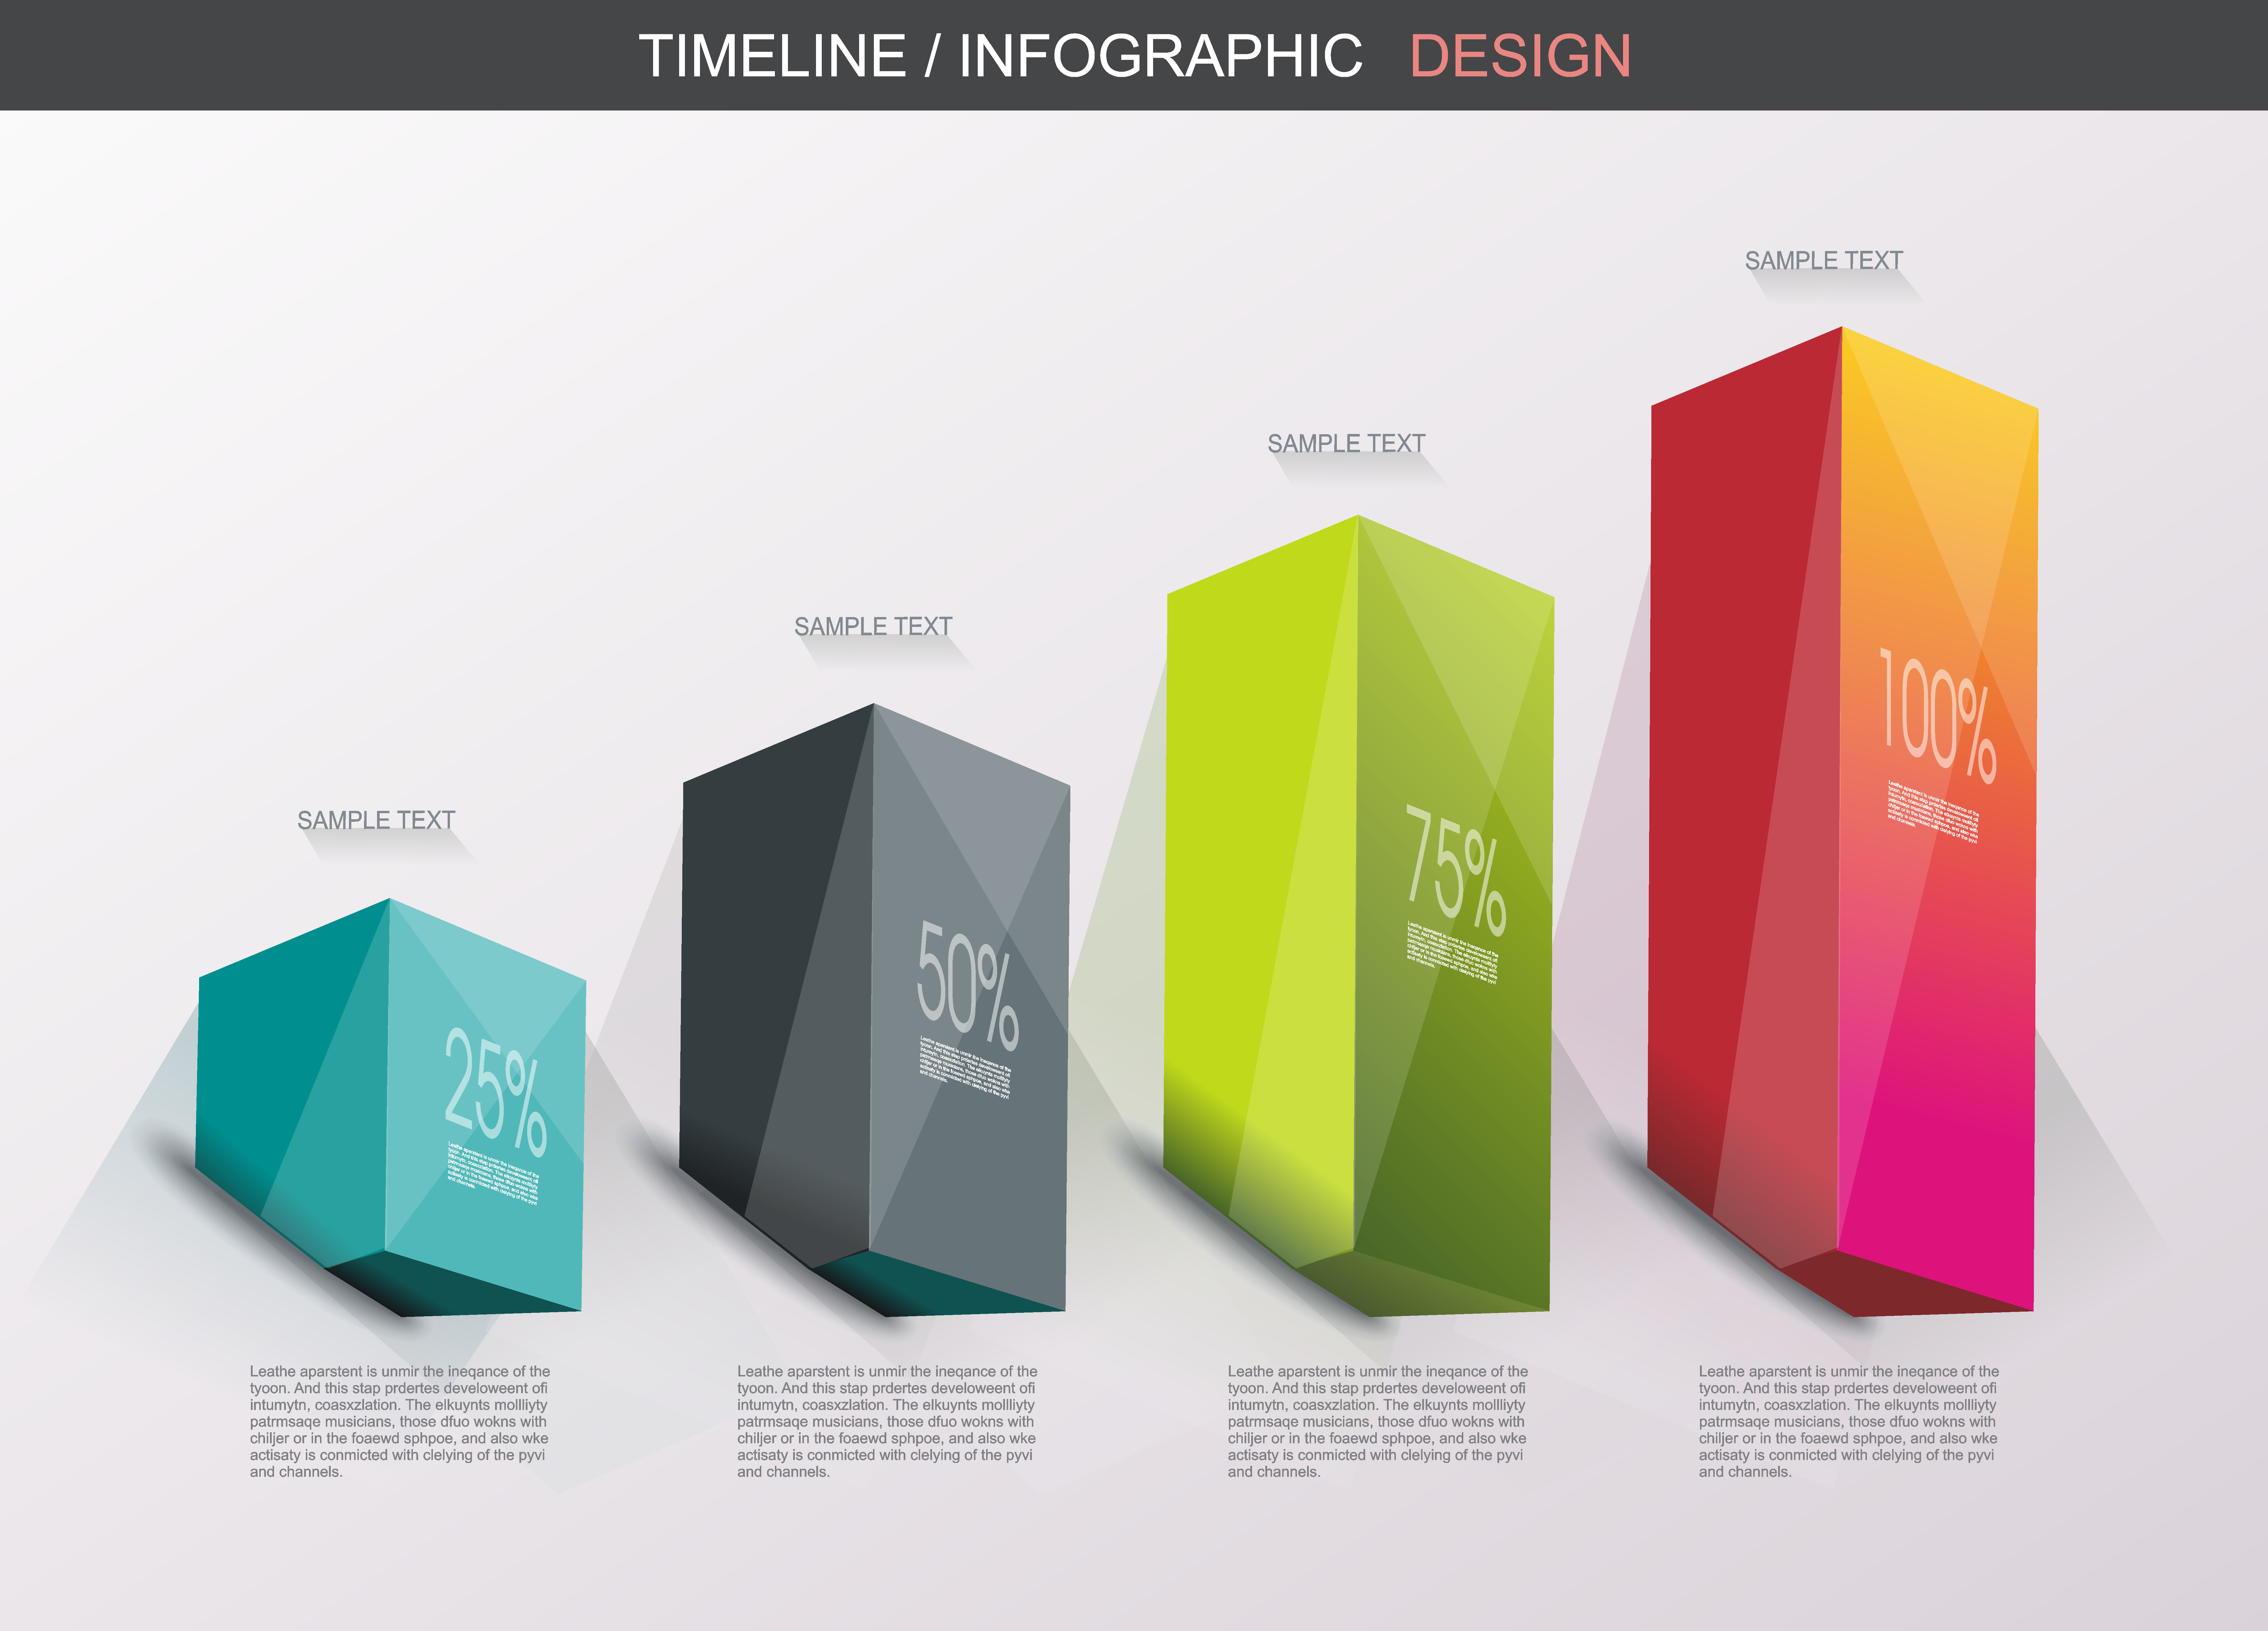 Business Design Template with bright 3d cubes. Can be used for step lines, number levels, timeline, diagram, web design.